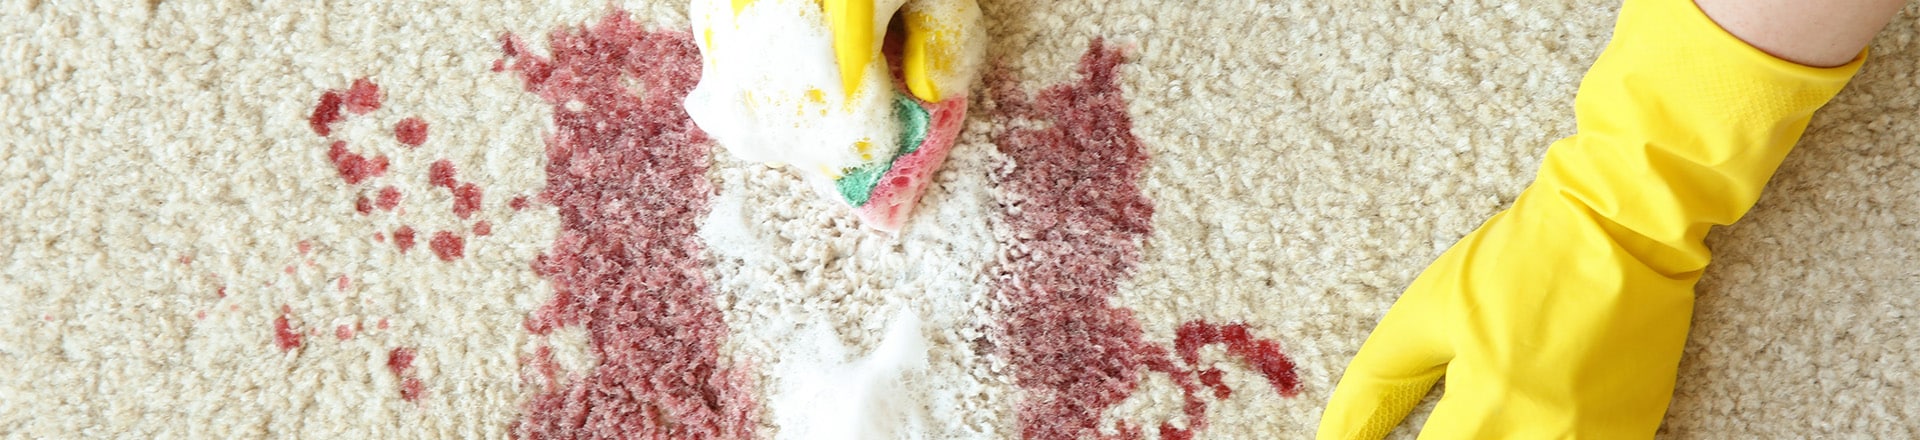 11Deal with the 5 Worst Carpet Stains with this Article